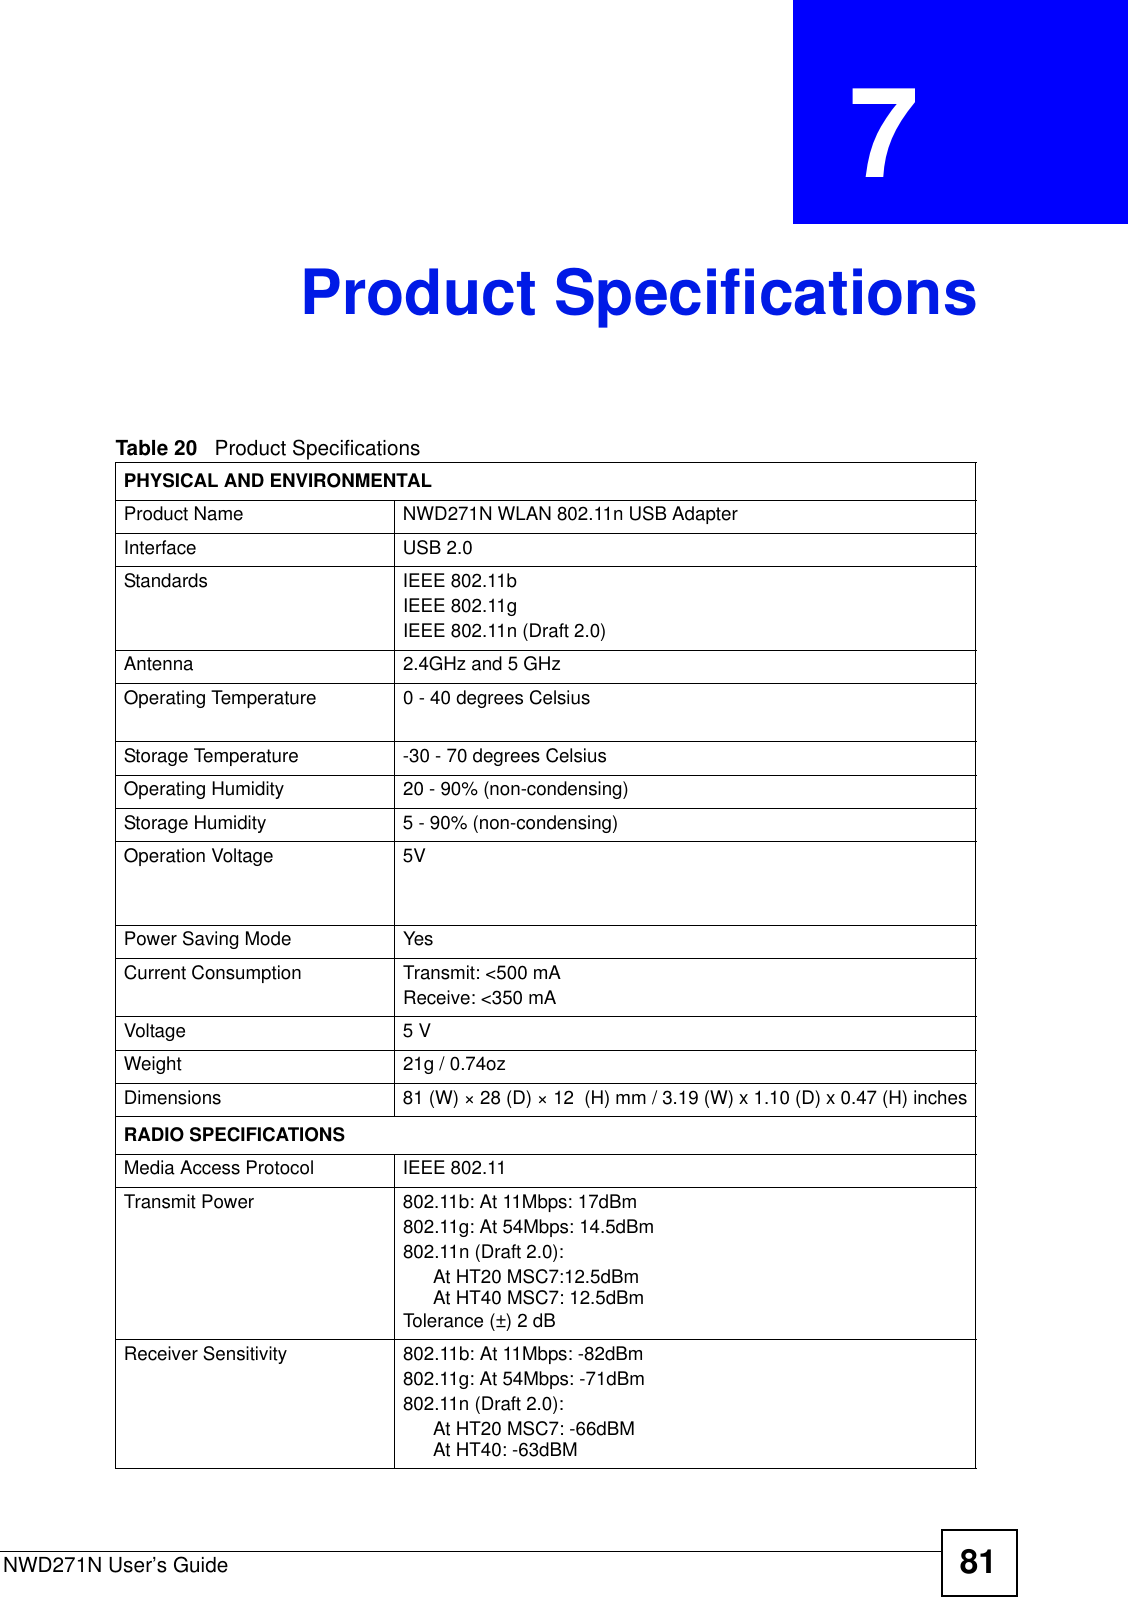 NWD271N User’s Guide 81CHAPTER  7 Product SpecificationsTable 20   Product Specifications PHYSICAL AND ENVIRONMENTALProduct Name  NWD271N WLAN 802.11n USB AdapterInterface USB 2.0Standards IEEE 802.11bIEEE 802.11gIEEE 802.11n (Draft 2.0)Antenna 2.4GHz and 5 GHz Operating Temperature 0 - 40 degrees CelsiusStorage Temperature -30 - 70 degrees CelsiusOperating Humidity 20 - 90% (non-condensing)Storage Humidity  5 - 90% (non-condensing)Operation Voltage 5VPower Saving Mode YesCurrent Consumption Transmit: &lt;500 mAReceive: &lt;350 mAVoltage 5 VWeight 21g / 0.74ozDimensions 81 (W) × 28 (D) × 12  (H) mm / 3.19 (W) x 1.10 (D) x 0.47 (H) inchesRADIO SPECIFICATIONSMedia Access Protocol IEEE 802.11Transmit Power 802.11b: At 11Mbps: 17dBm802.11g: At 54Mbps: 14.5dBm802.11n (Draft 2.0): At HT20 MSC7:12.5dBmAt HT40 MSC7: 12.5dBmTolerance (±) 2 dBReceiver Sensitivity 802.11b: At 11Mbps: -82dBm802.11g: At 54Mbps: -71dBm802.11n (Draft 2.0):At HT20 MSC7: -66dBMAt HT40: -63dBM